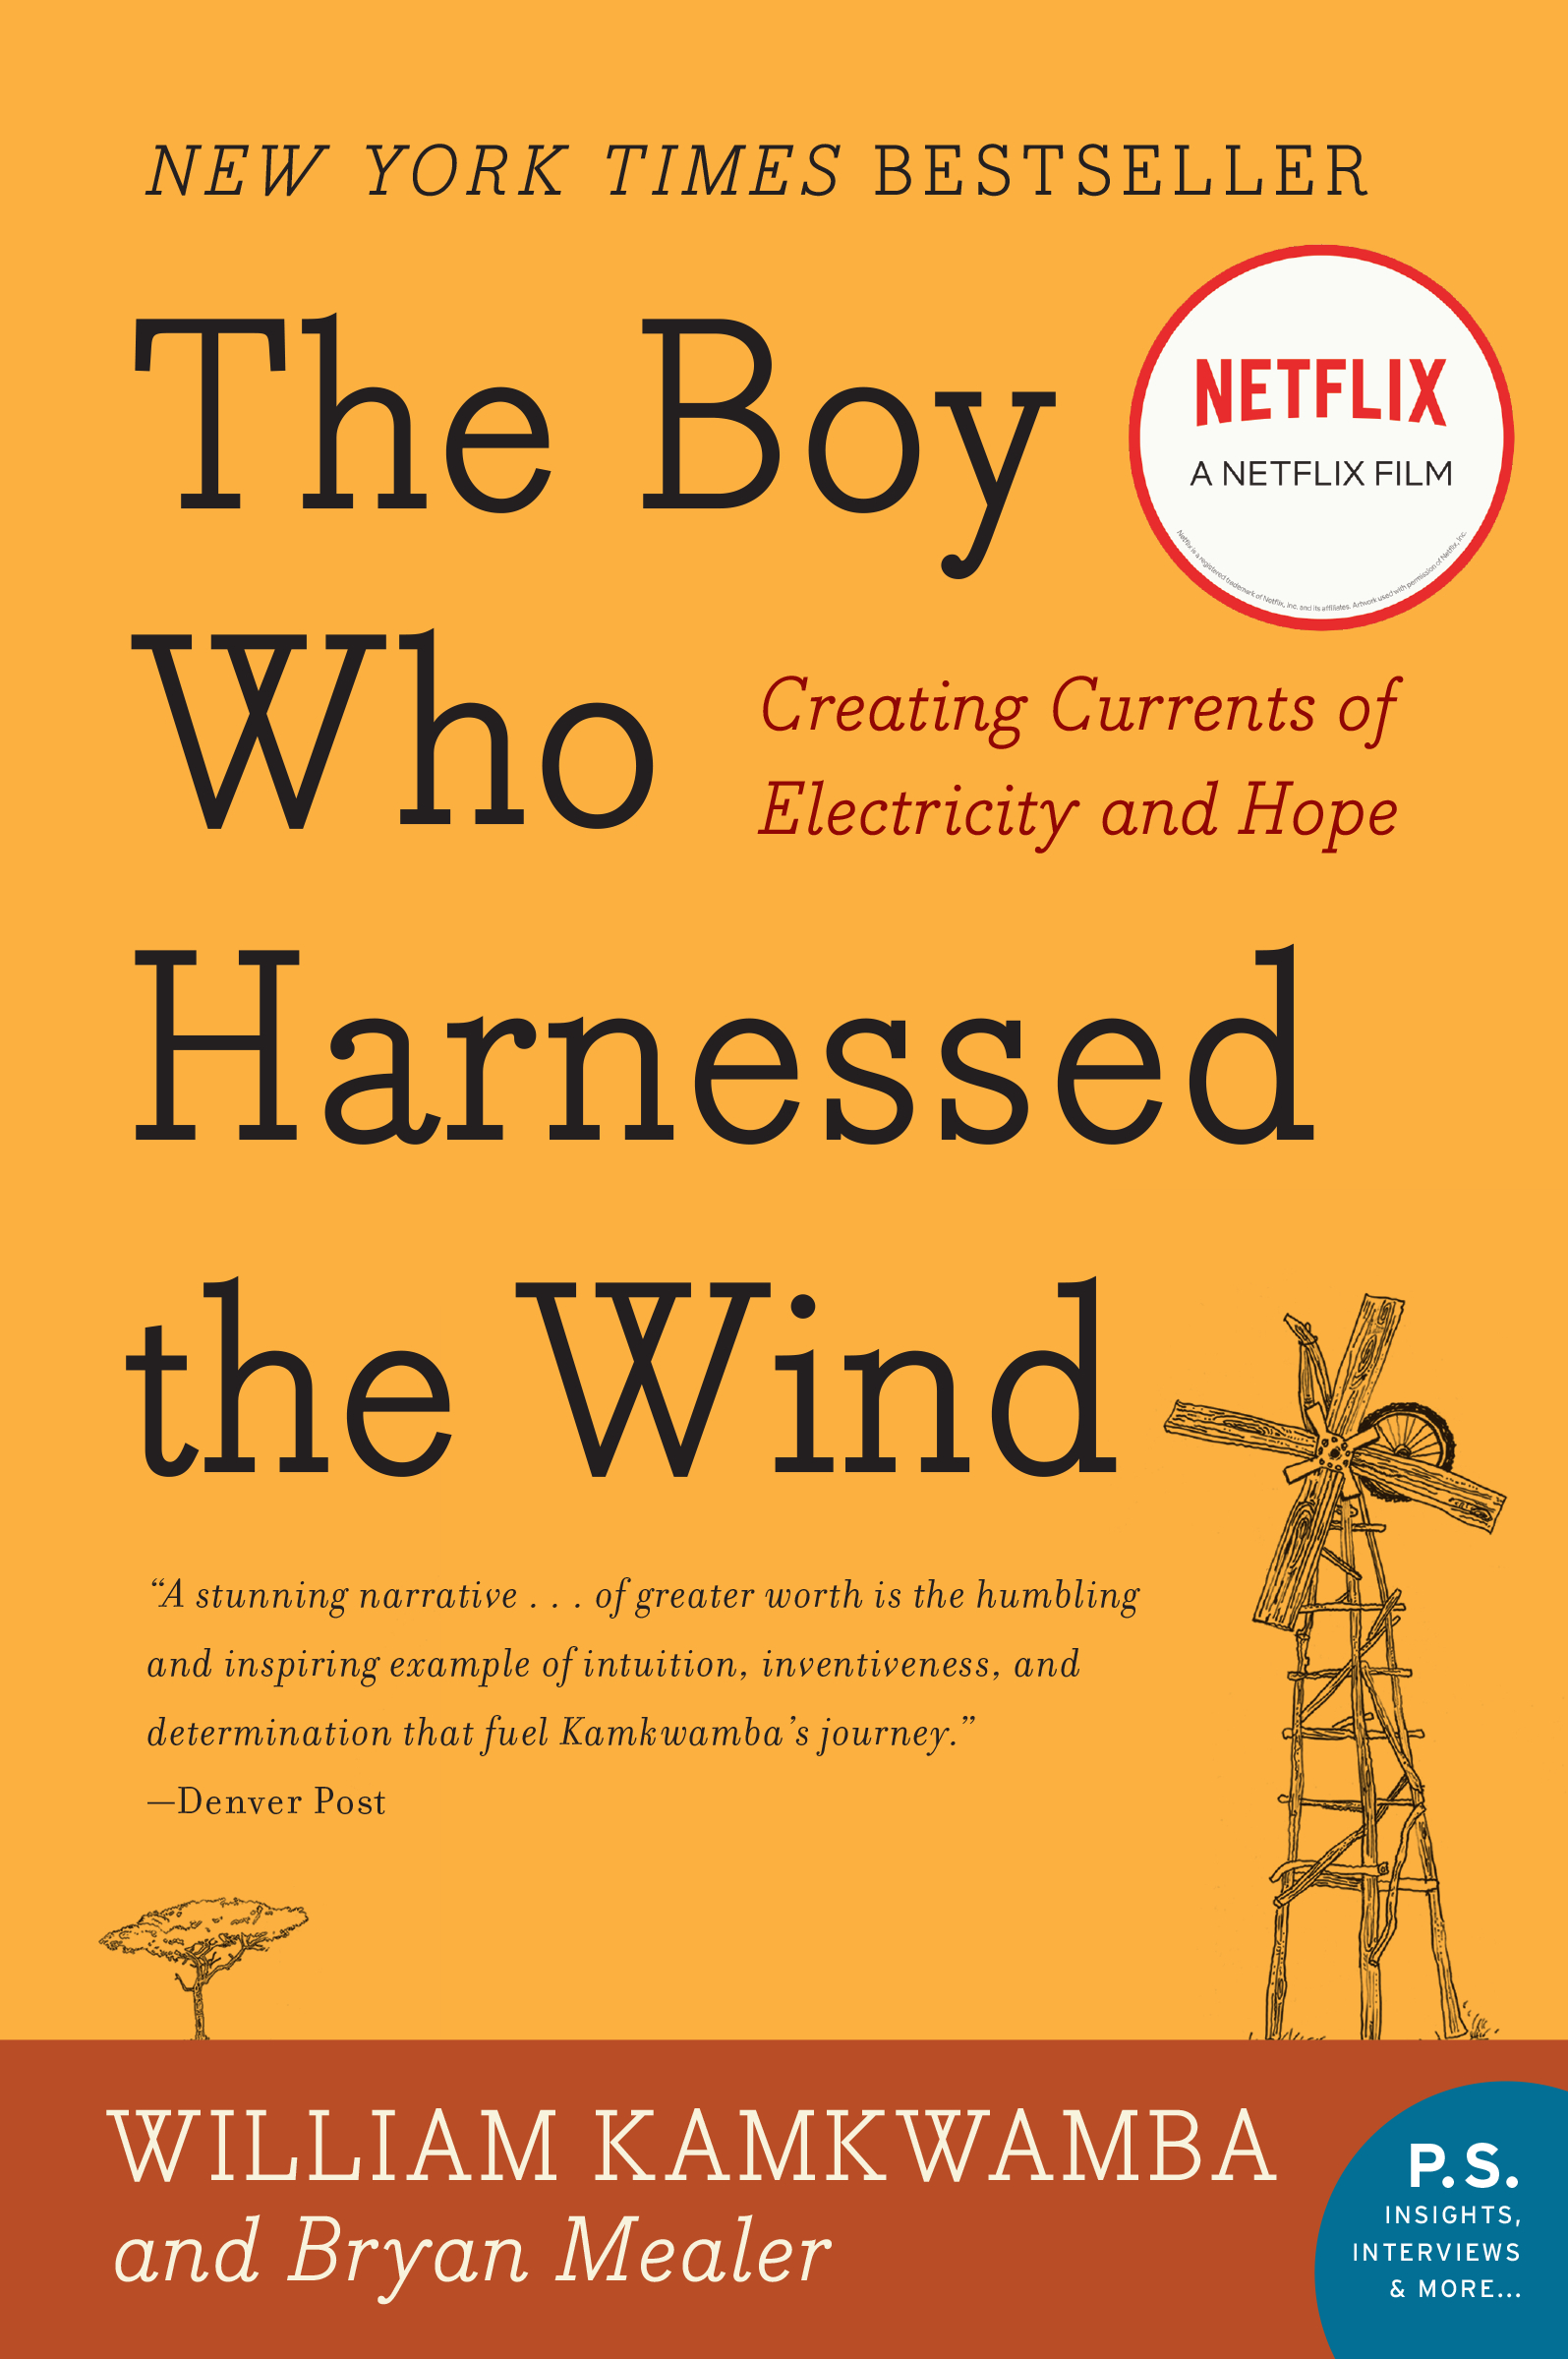 The Boy Who Harnessed the Wind book jacket